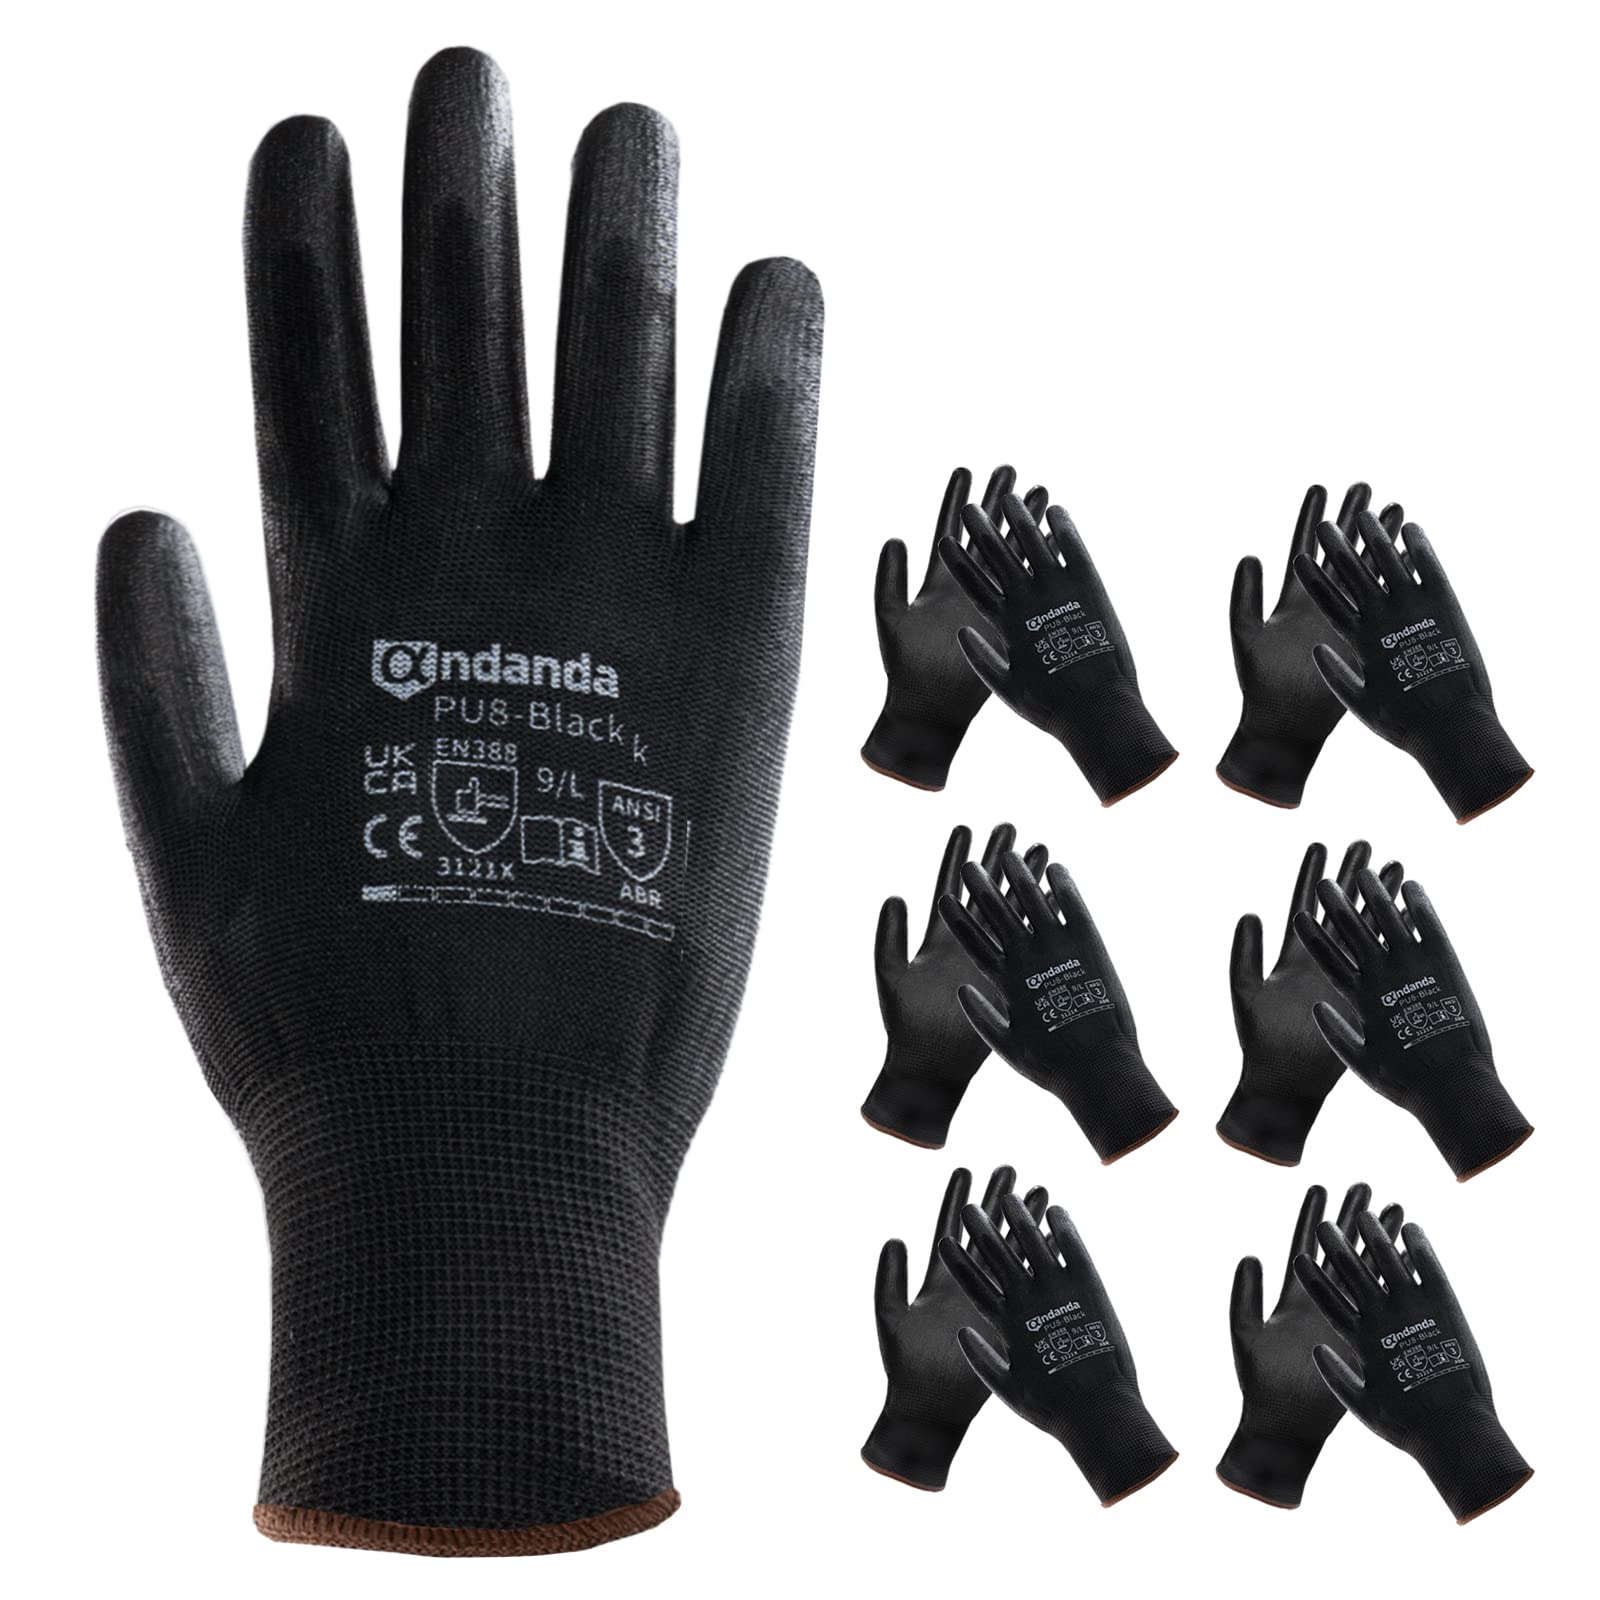 John Pye Auctions - 19 X ANDANDA 6 PAIRS SAFETY WORK GLOVES, GARDENING  GLOVES, SEAMLESS KNIT WORK GLOVES WITH PU COATED, NON SLIP, IDEAL BLACK  WORK GLOVES MEN, MULTI PURPOSE FOR GENERAL